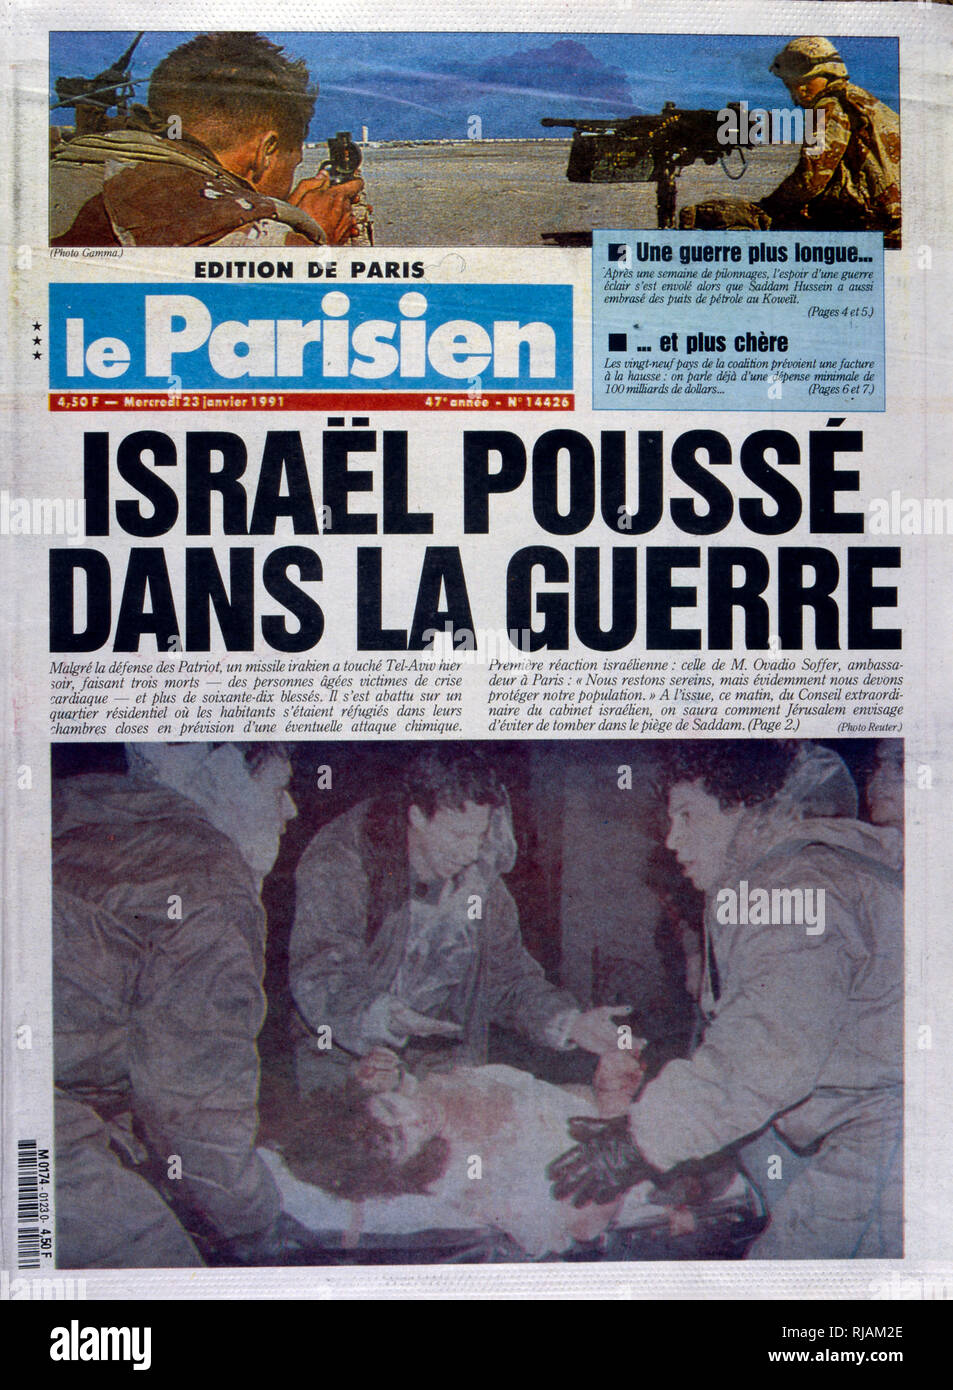 Headline in 'Le Parisien' a French newspaper, 23rd January 1991, concerning a missile attack on Israel during the Gulf War (2 August 1990 - 28 February 1991). codenamed Operation Desert Shield and Operation Desert Storm, the war waged by coalition forces from 35 nations led by the United States against Iraq in response to Iraq's invasion and annexation of Kuwait. the pictures show French filed commanders and the French War cabinet under President Mitterrand. Stock Photo